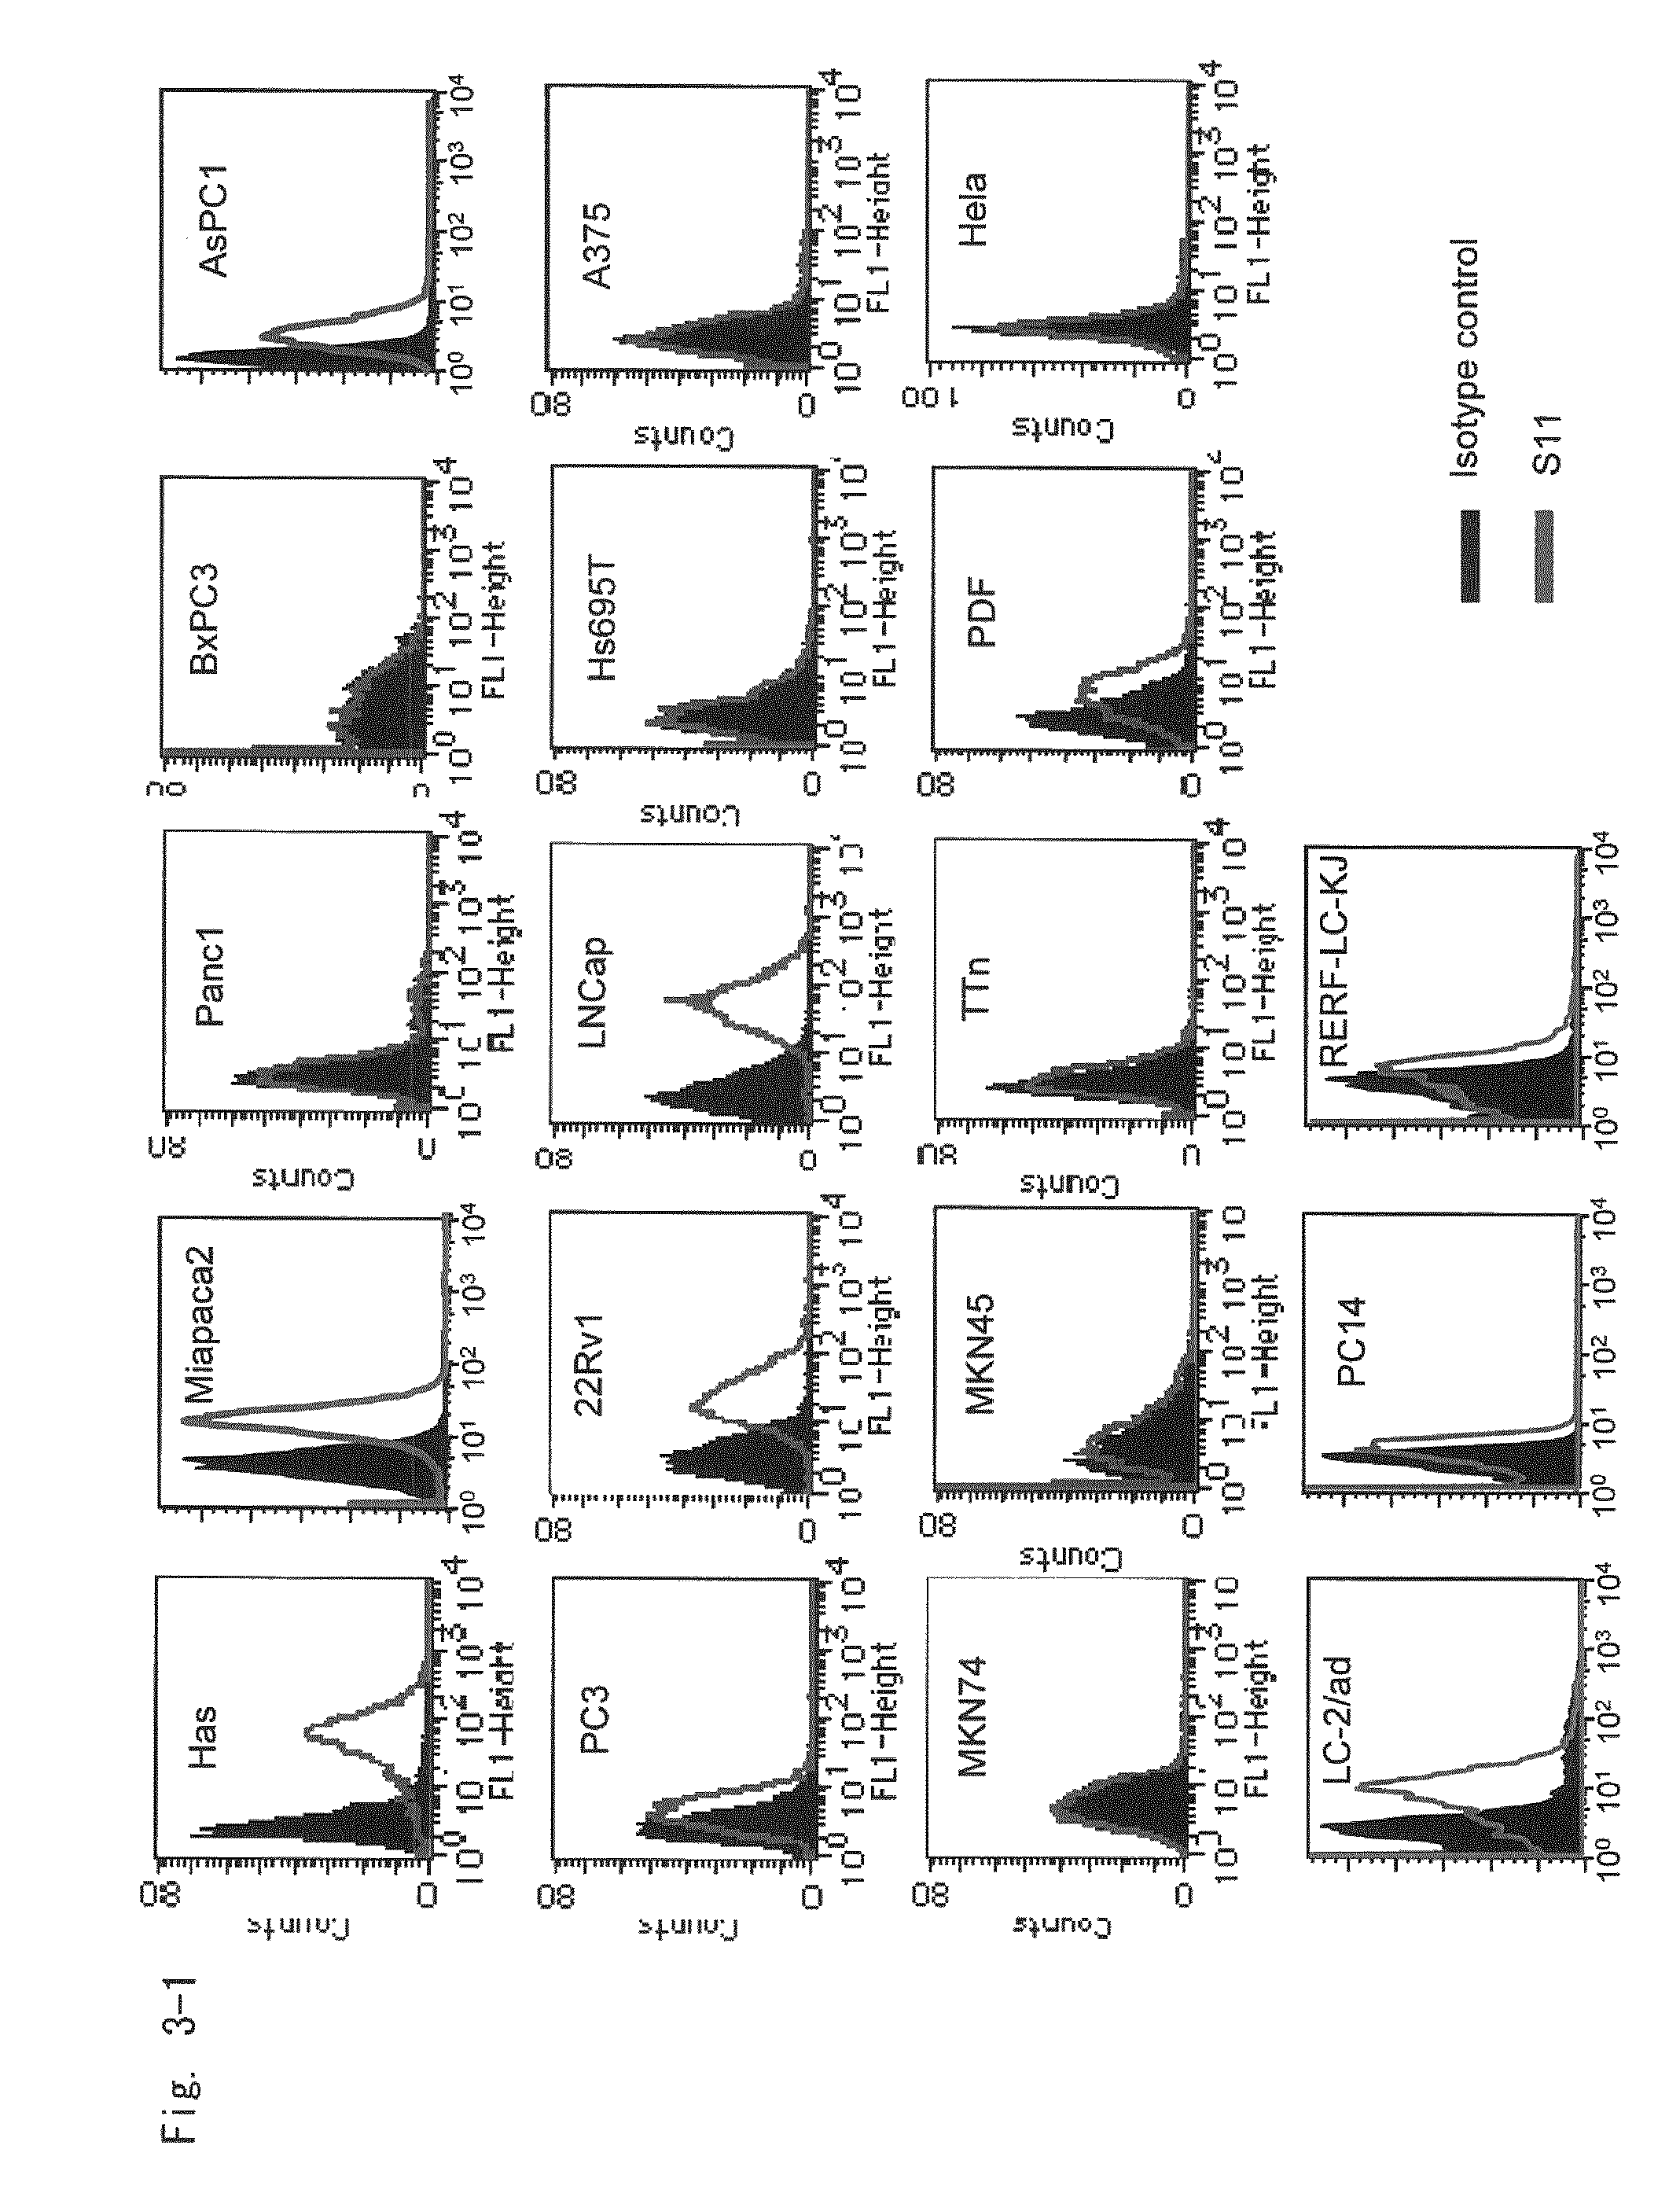 Antibody directed against PAP2a and use thereof for diagnostic and therapeutic purposes